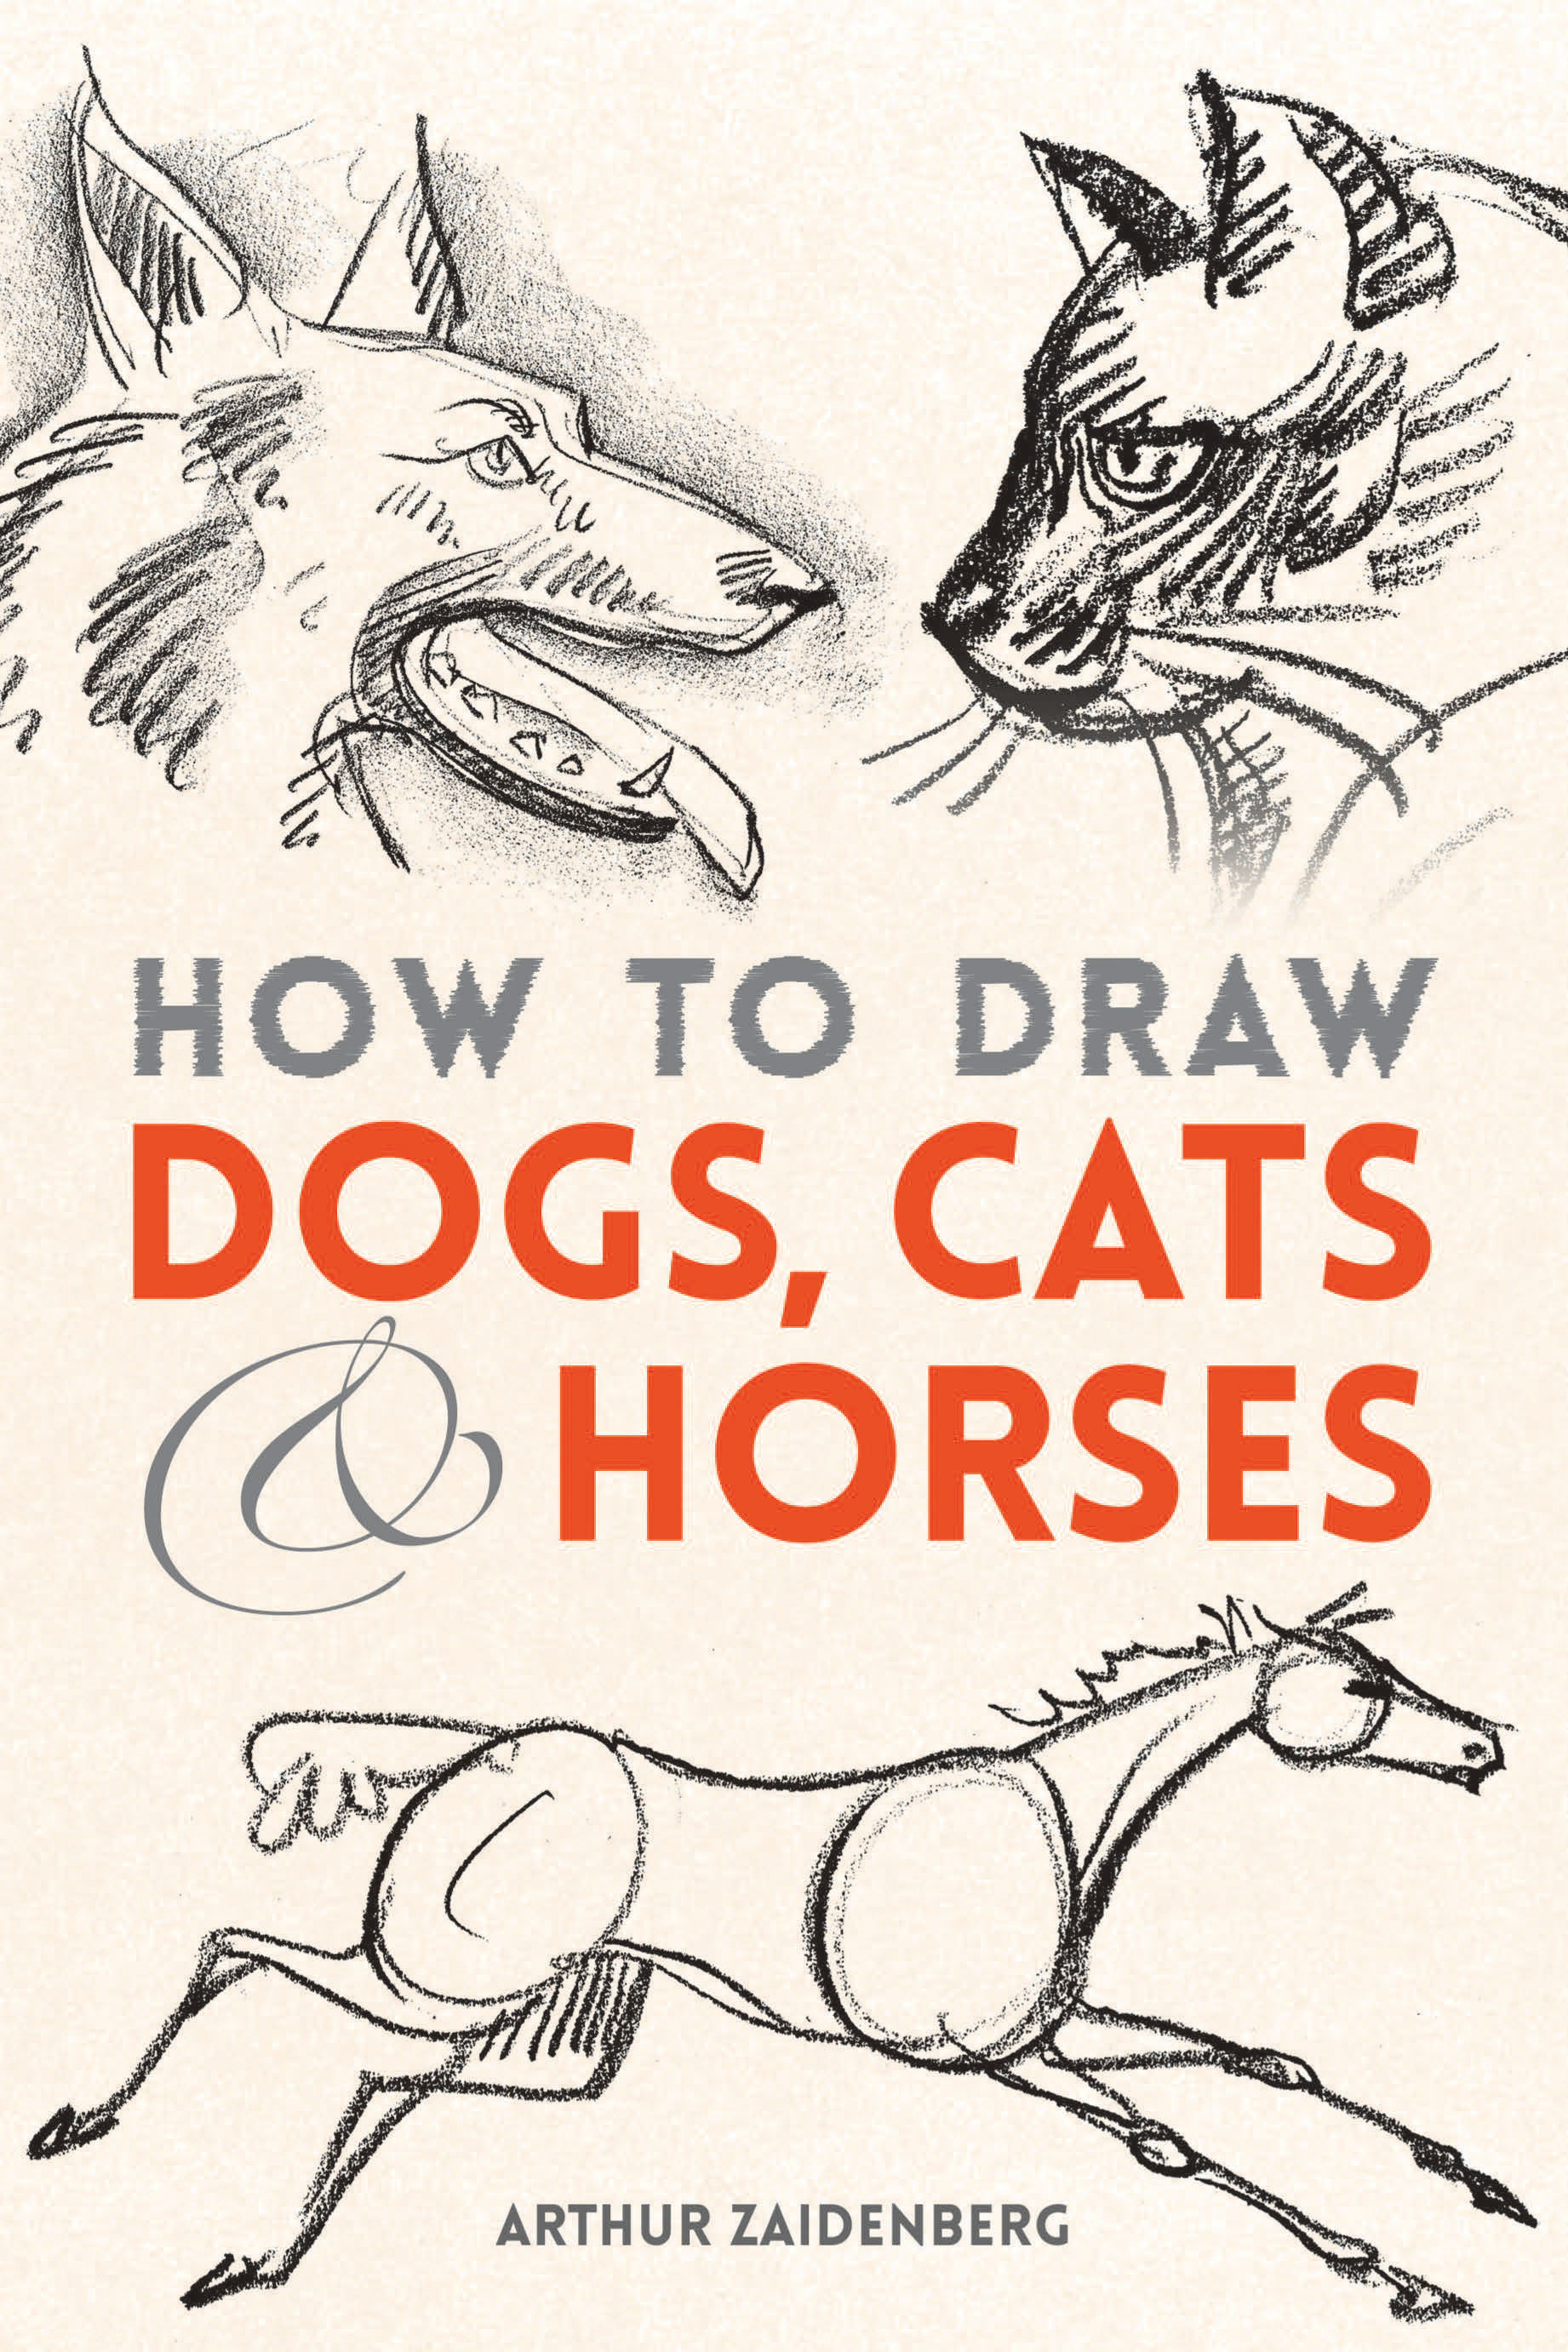 PDF] How to Draw Dogs, Cats and Horses by Arthur Zaidenberg eBook | Perlego